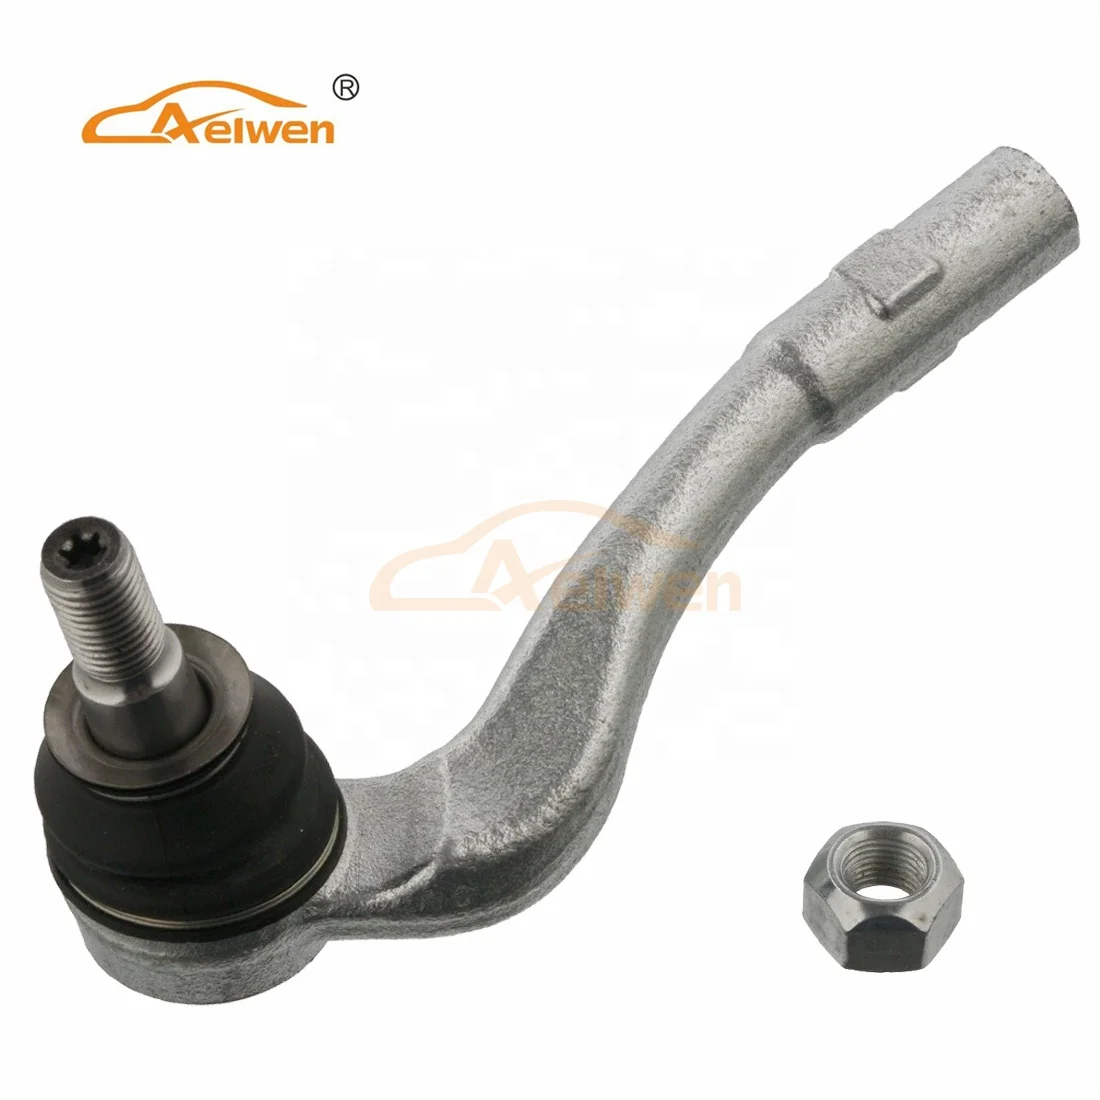 
Car Tie Rod End used for C-Class Left: 2043300903 A2043300903 Right: 2043301003 A2043301003 